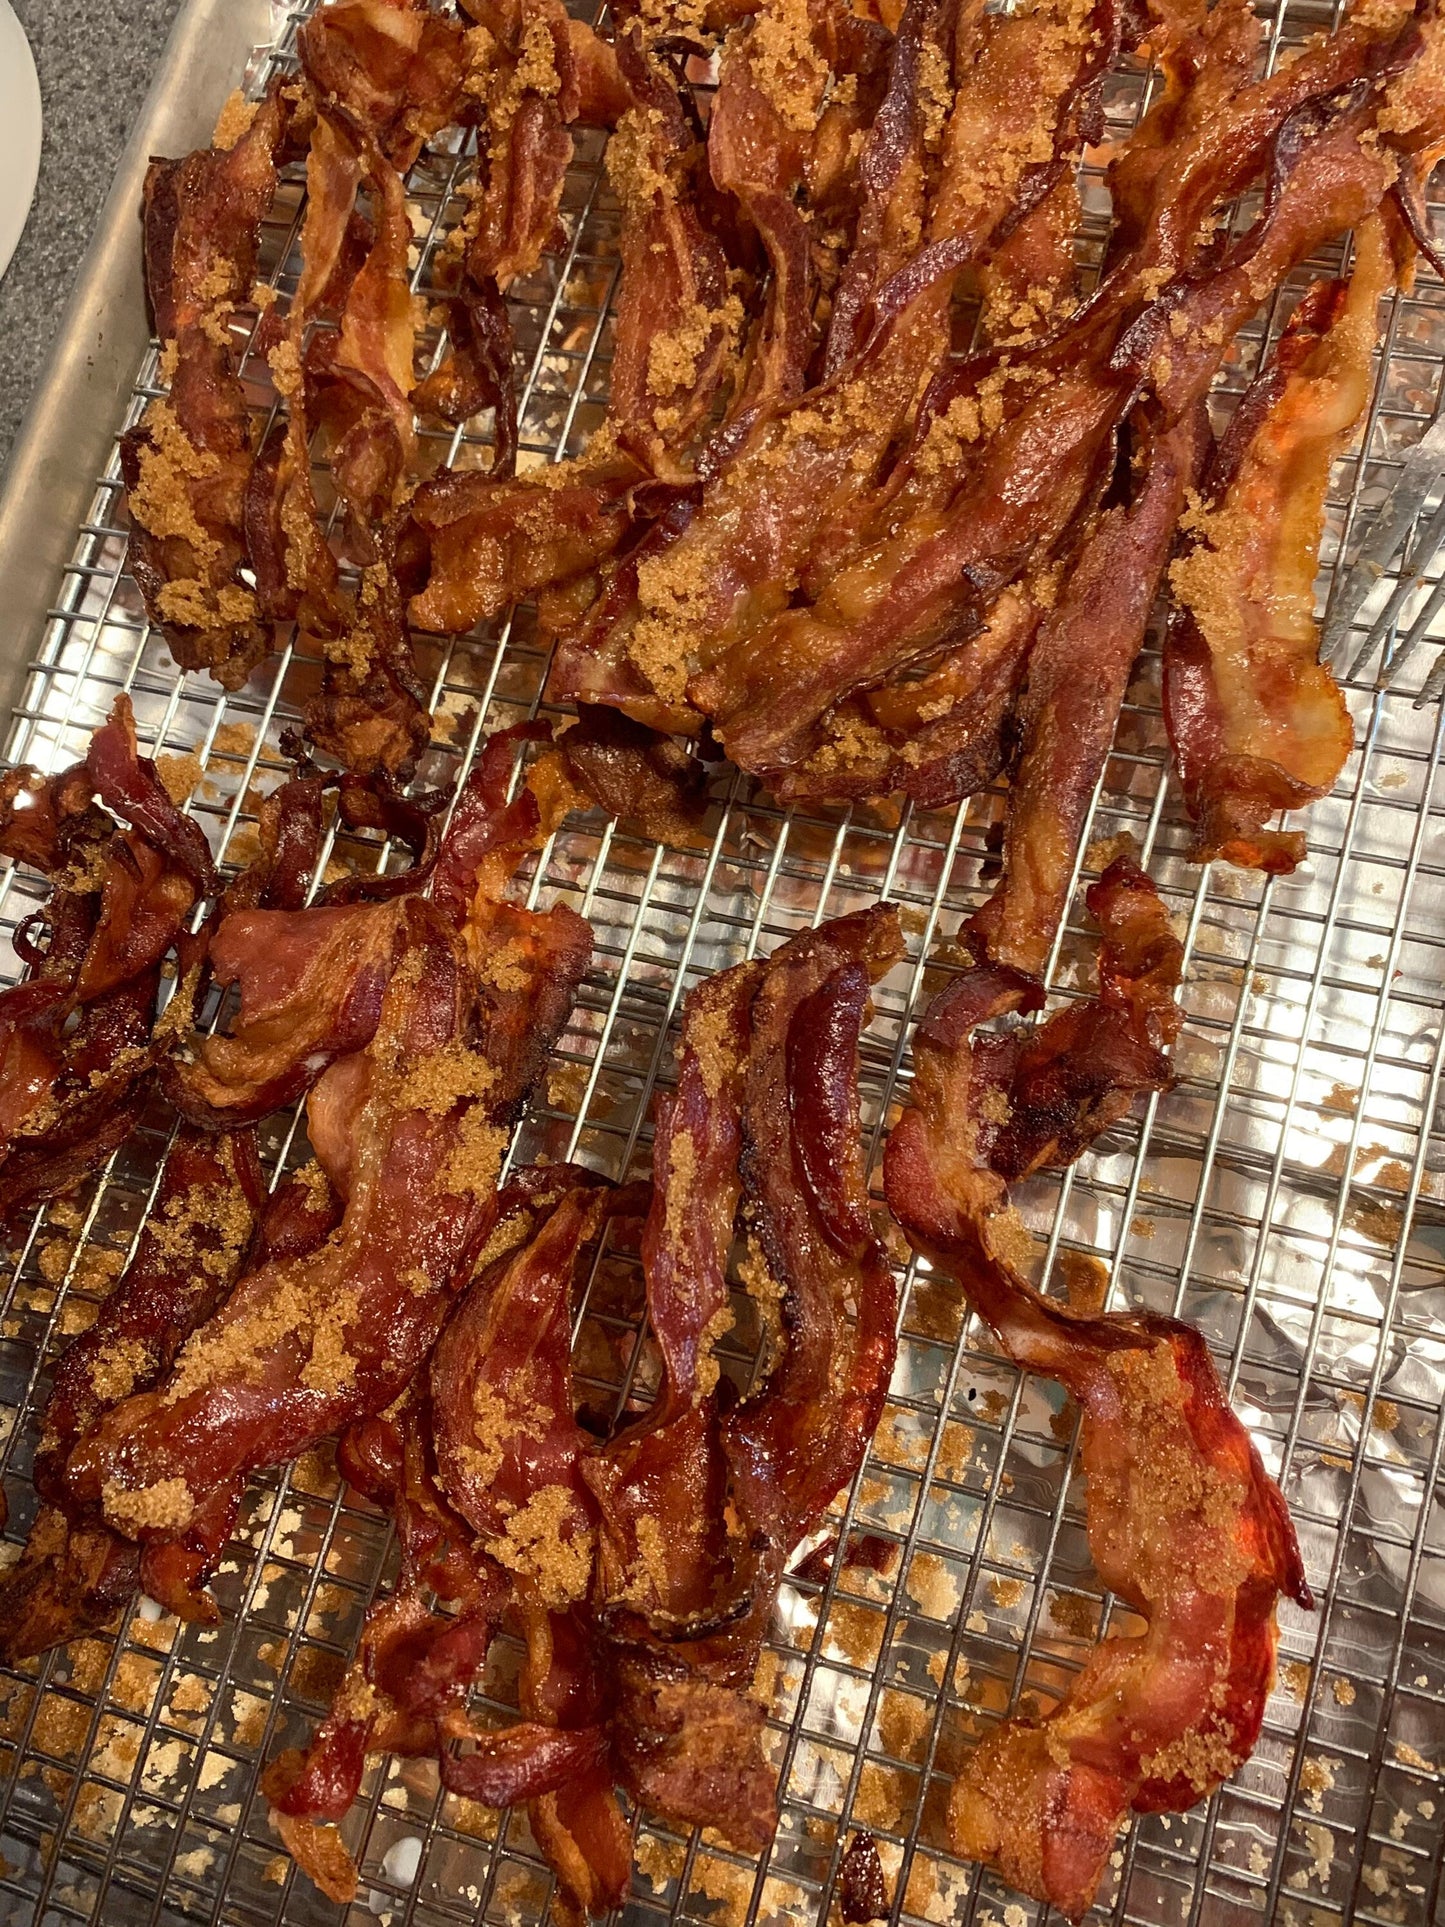 Candied Bacon - 0 NET CARBS